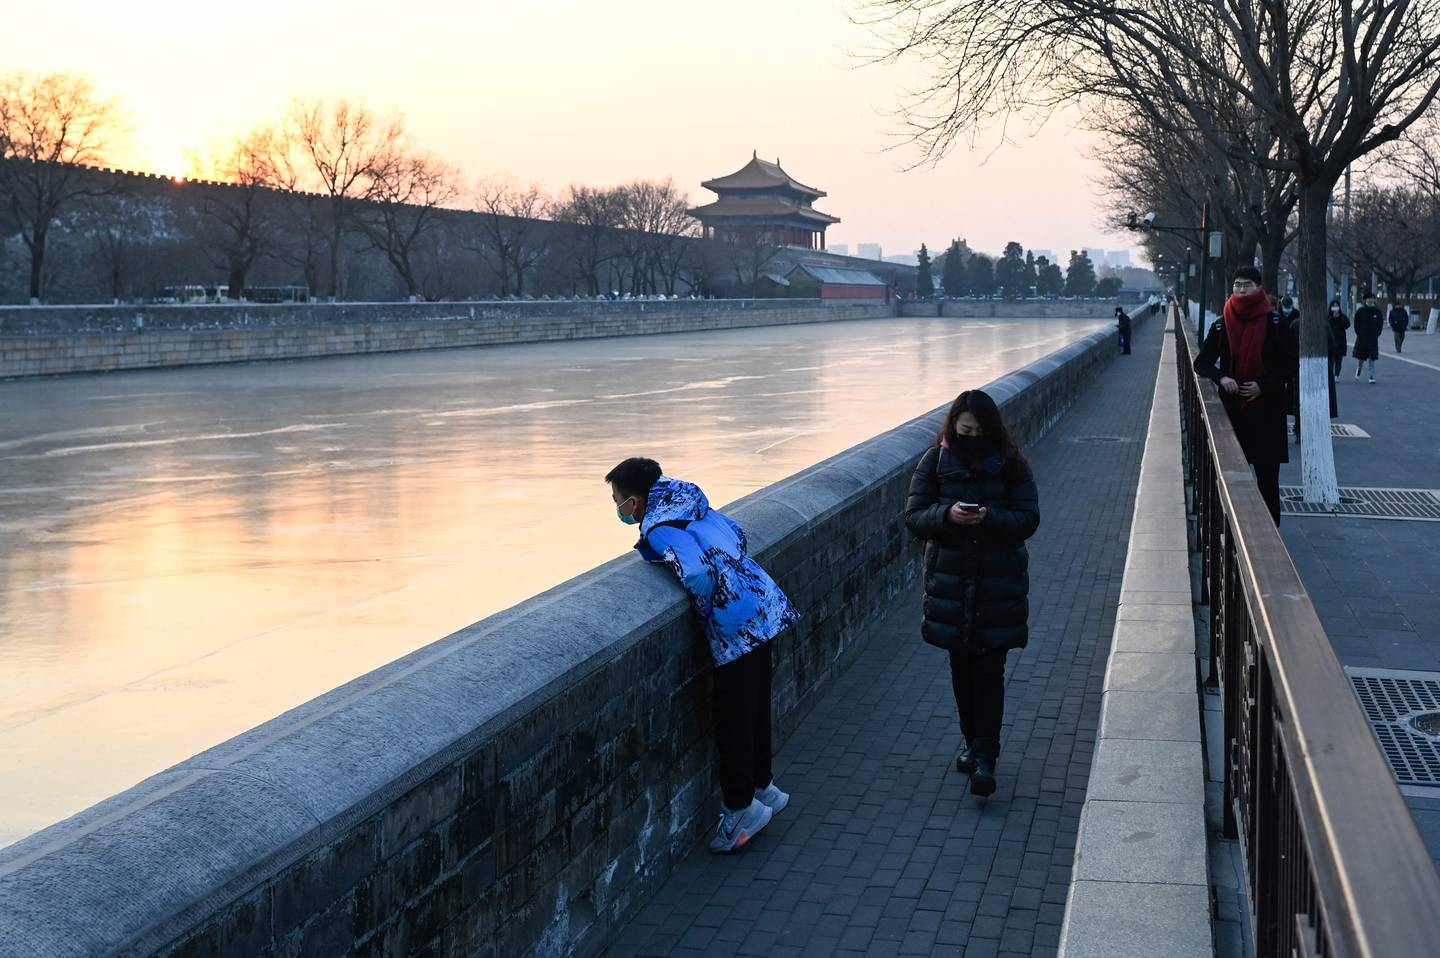 Travel to China for tourism purposes, such as seeing the Forbidden City or The Great Wall of China, is prohibited because of Covid-19. AFP